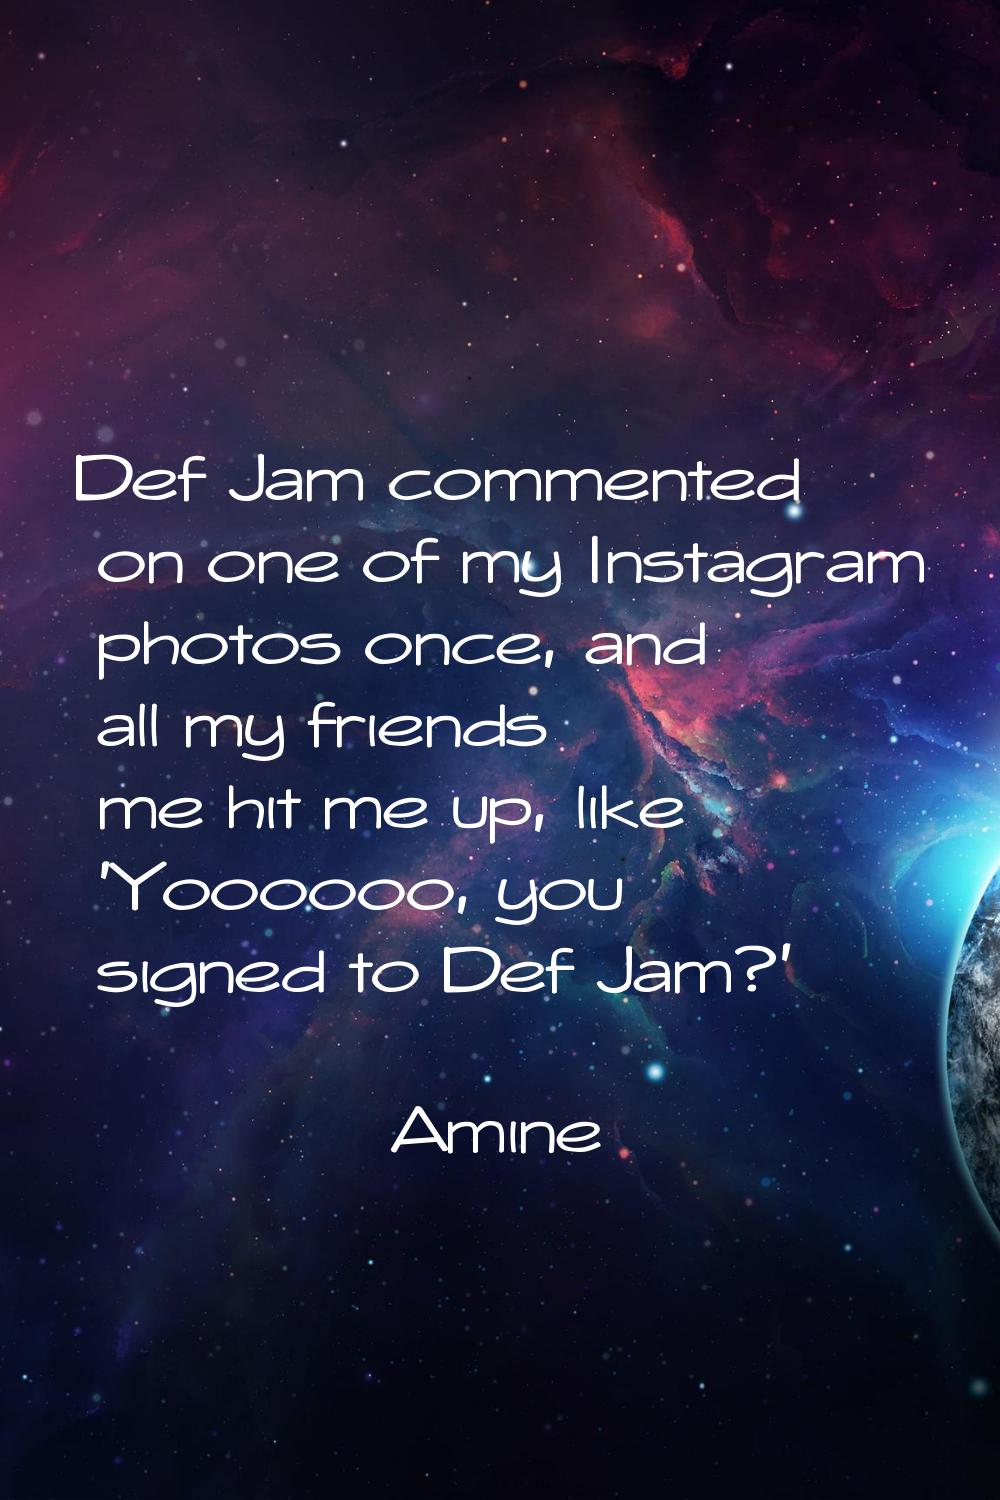 Def Jam commented on one of my Instagram photos once, and all my friends me hit me up, like 'Yooooo